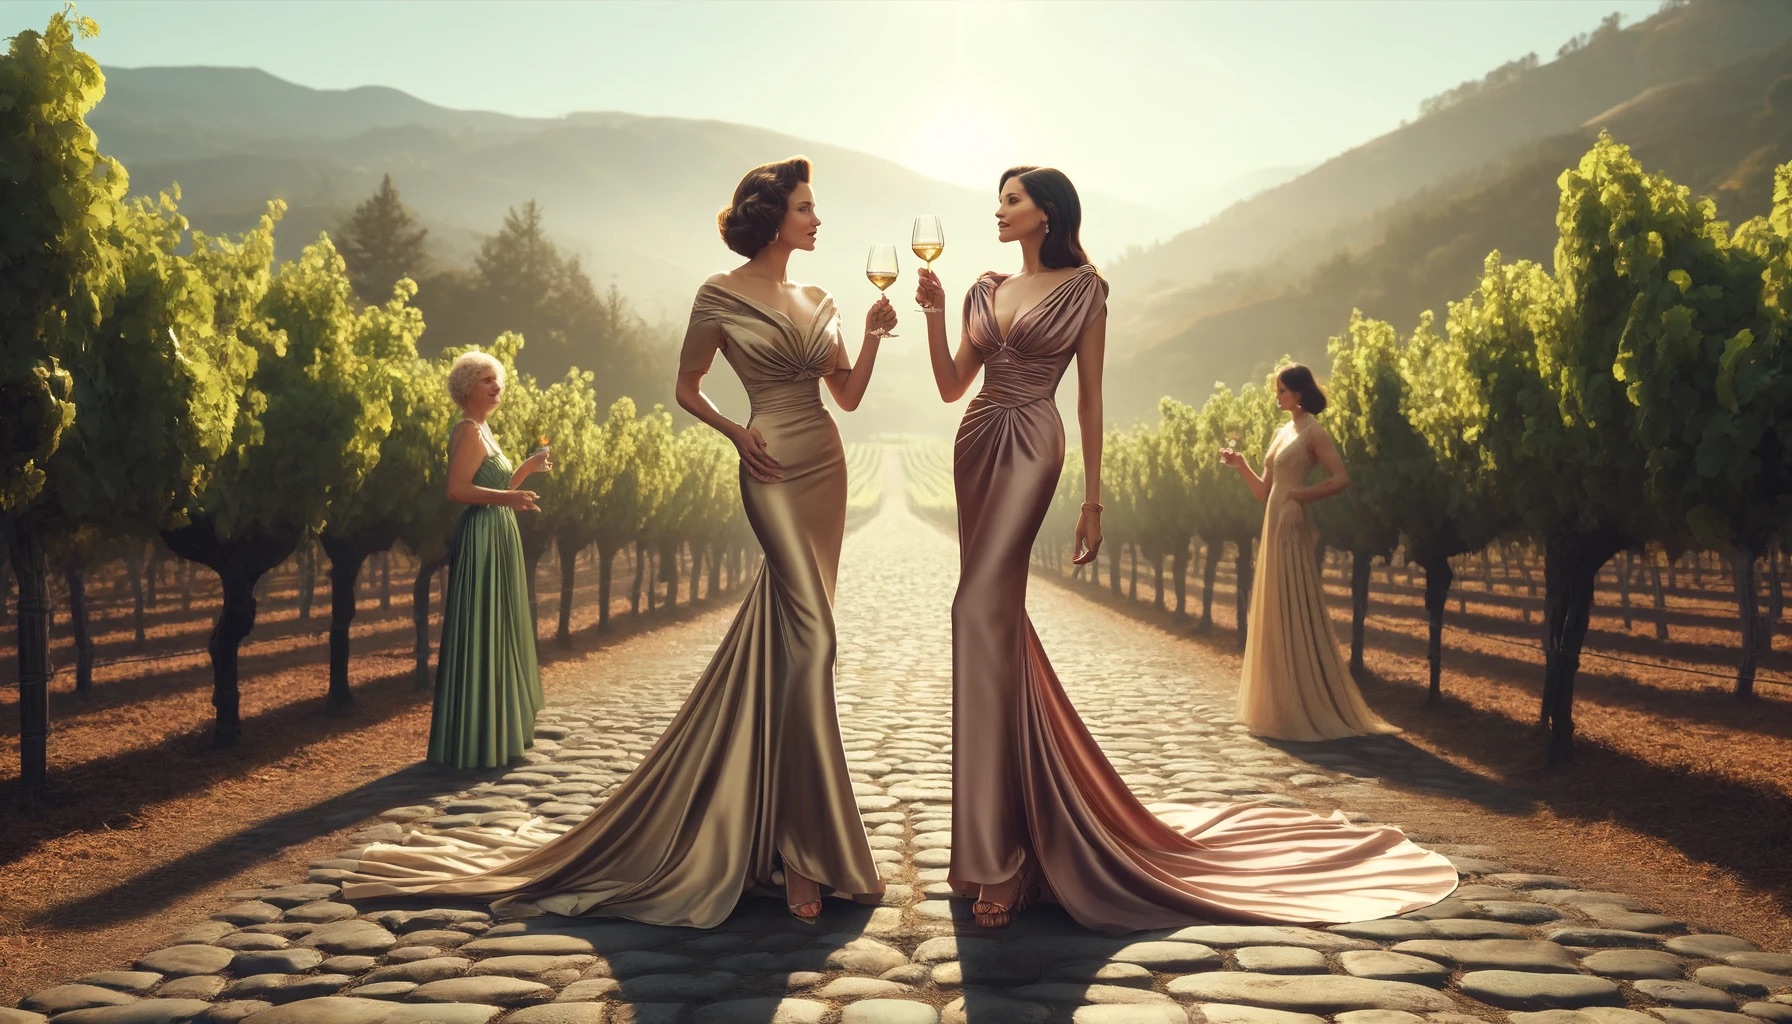 alley, as the scent of ripe grapes mingles with the fresh air, I, Kathy Fields, alongside my exquisite mother, Marie Read Saia, find ourselves celebrating Mother’s Day with an unparalleled blend of fashion and festivity